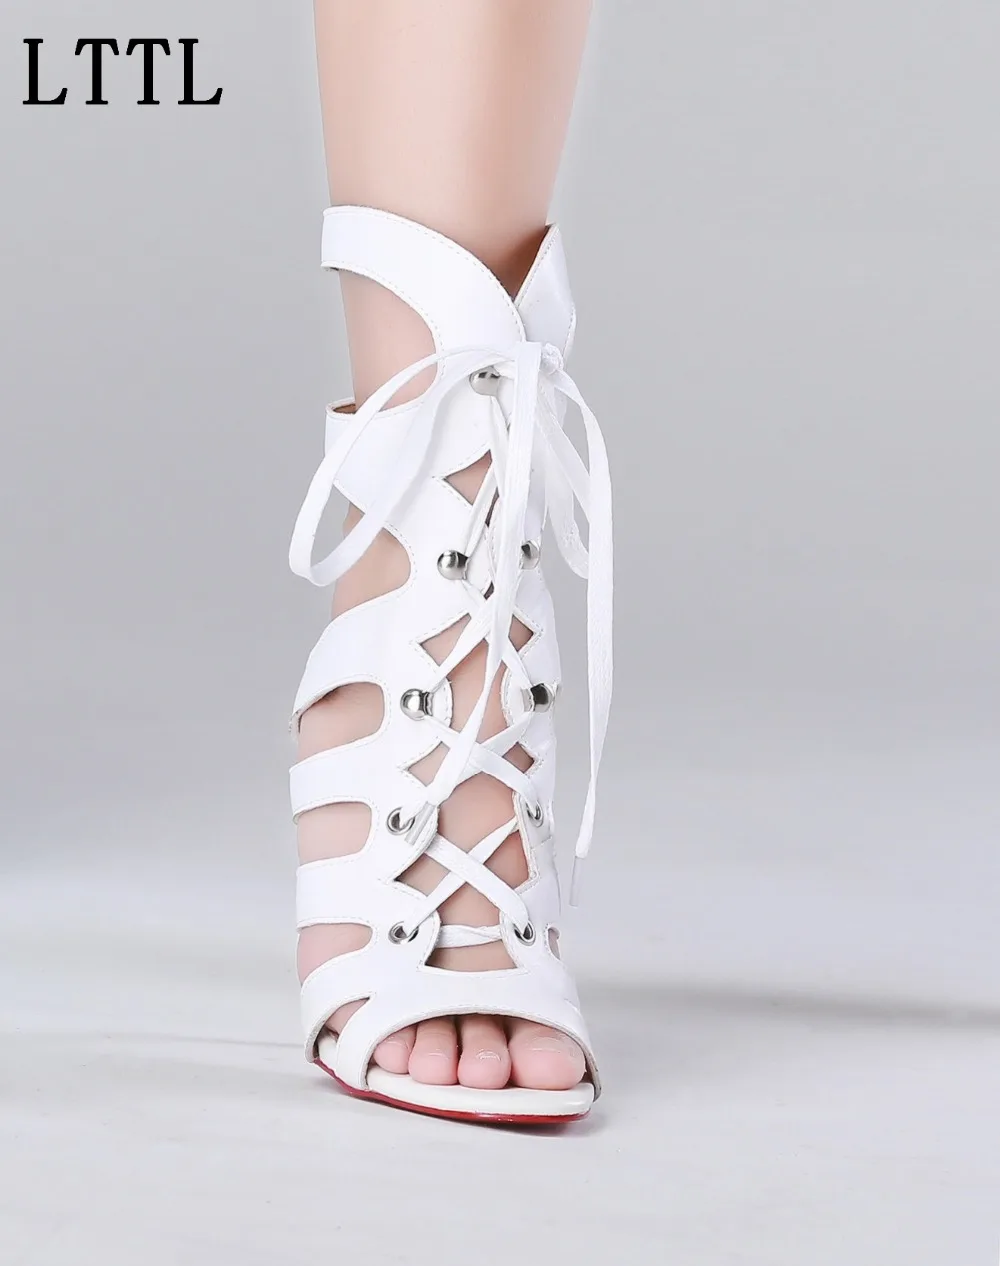 2017 New Arrival Women Gladiator Sandals Summer Cut-outs Strappy High Heels Shoes White Sexy Open Toe Celebrity Female Sandals